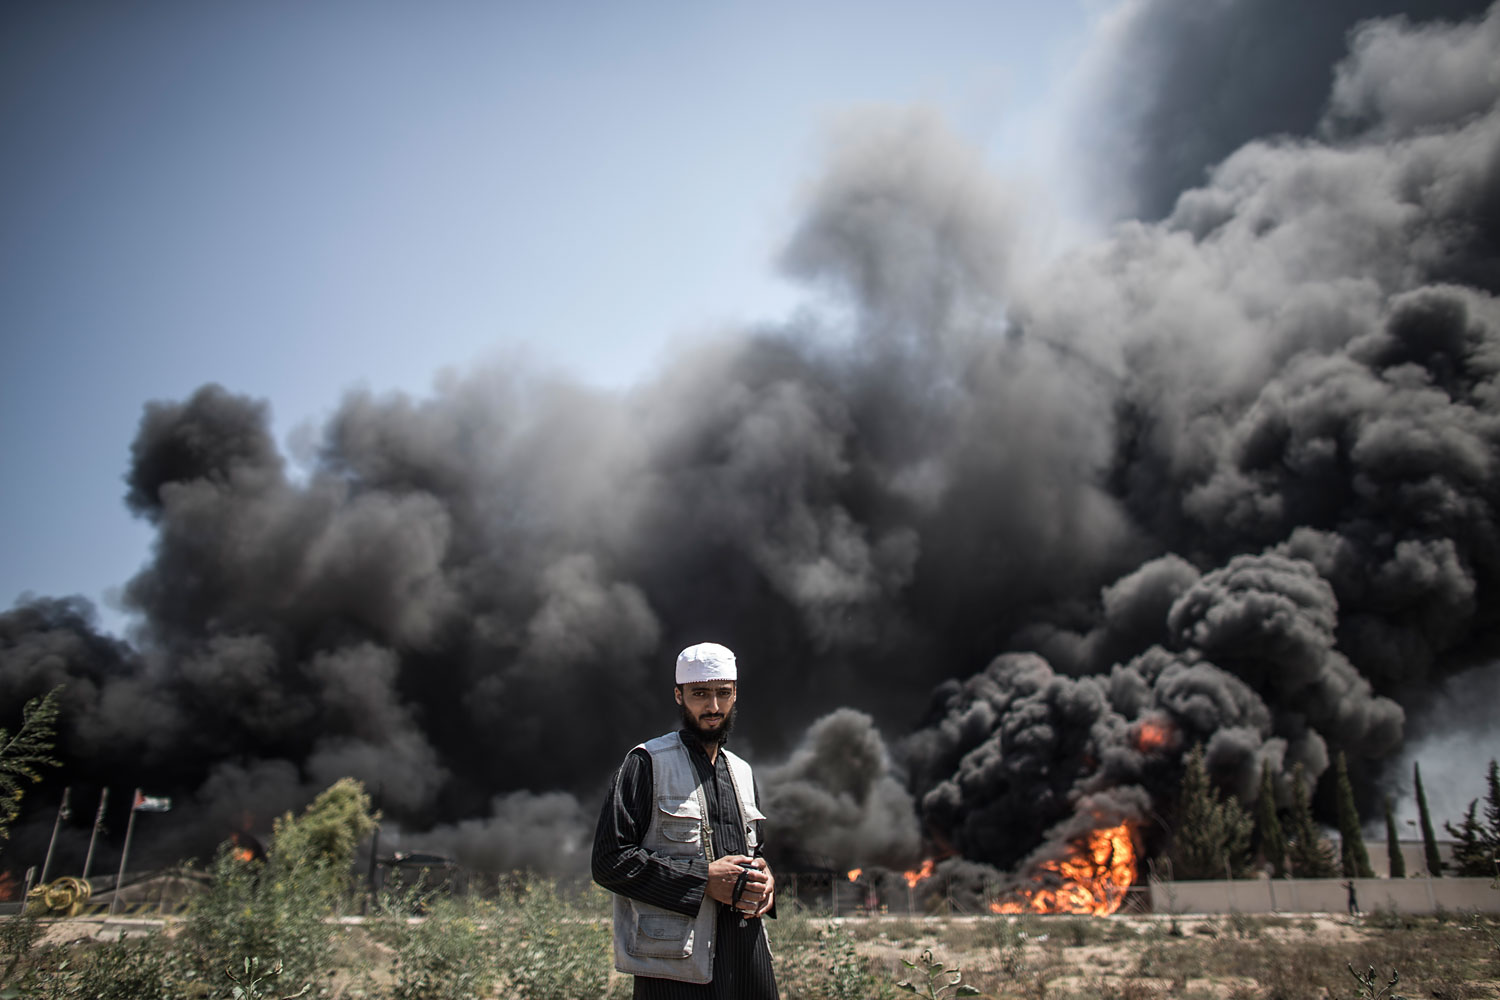 A Palestinian man walks in front of a fire raging at Gaza's main power plant on July 29, 2014, in Gaza City, following an overnight Israeli air strike (Oliver Weiken—EPA)